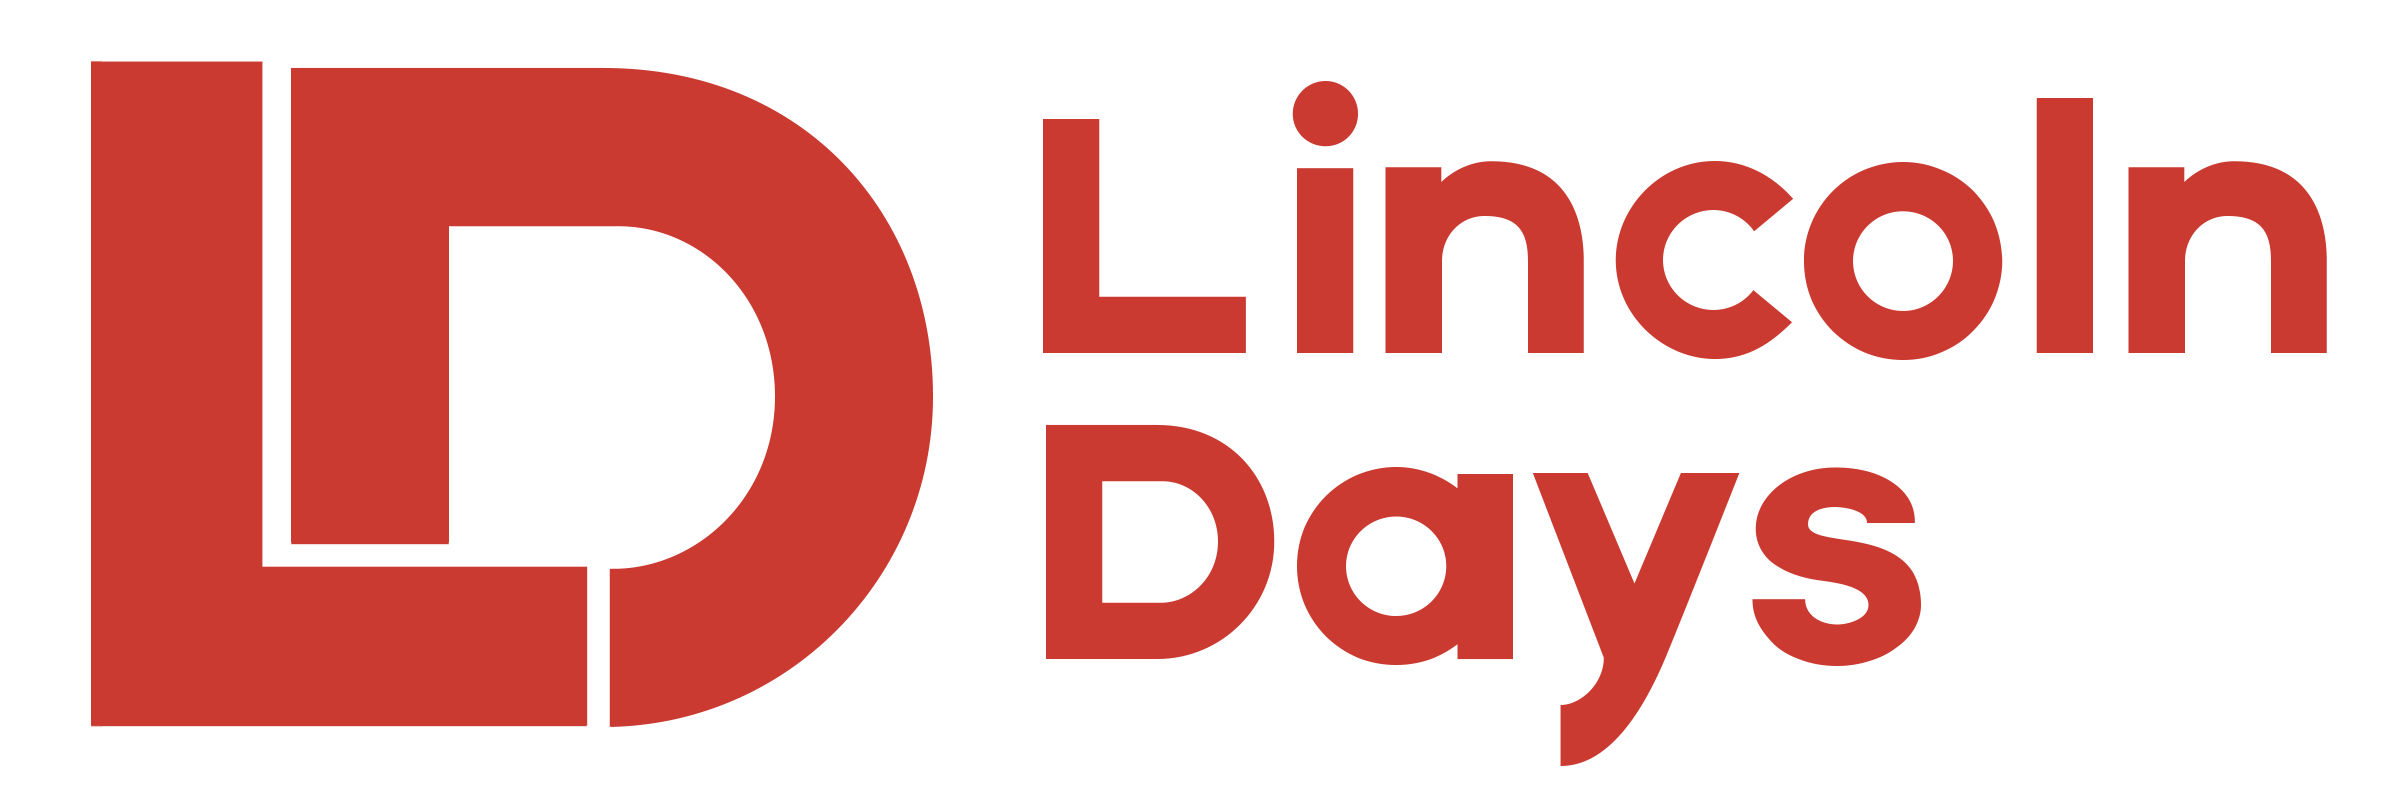 Lincoln Days 2017